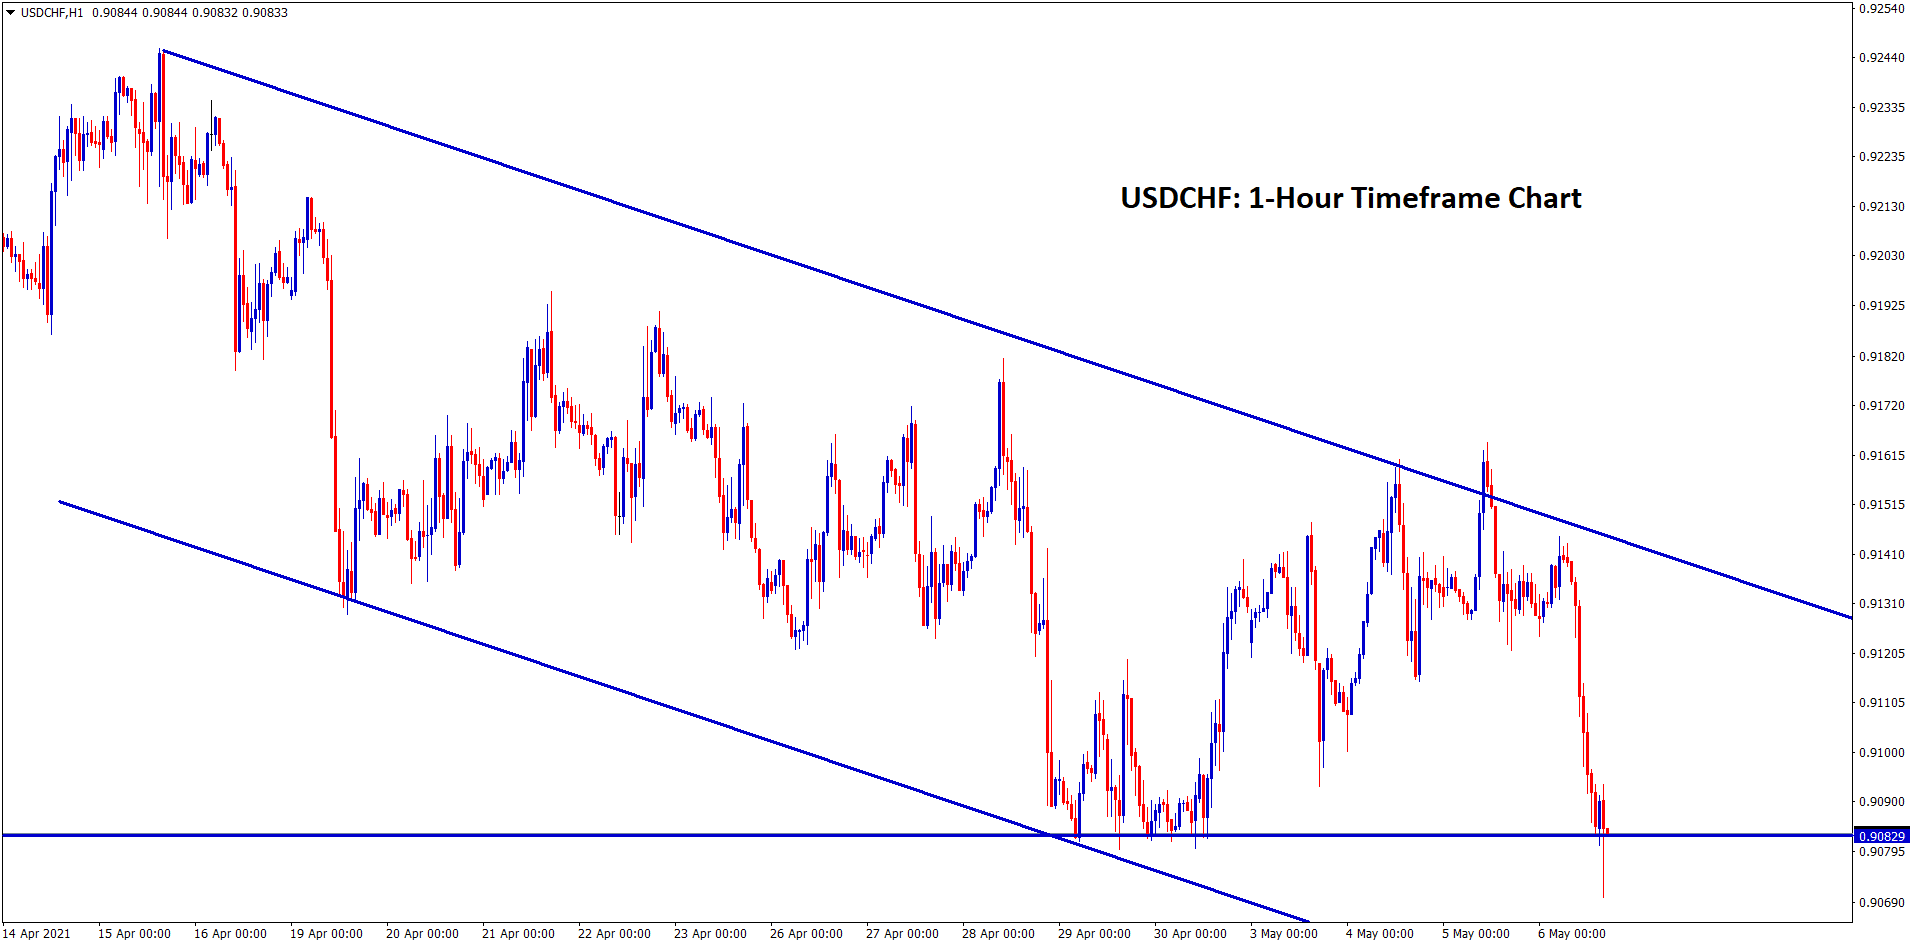 USDCHF moving in downtrend channel now standing at the support